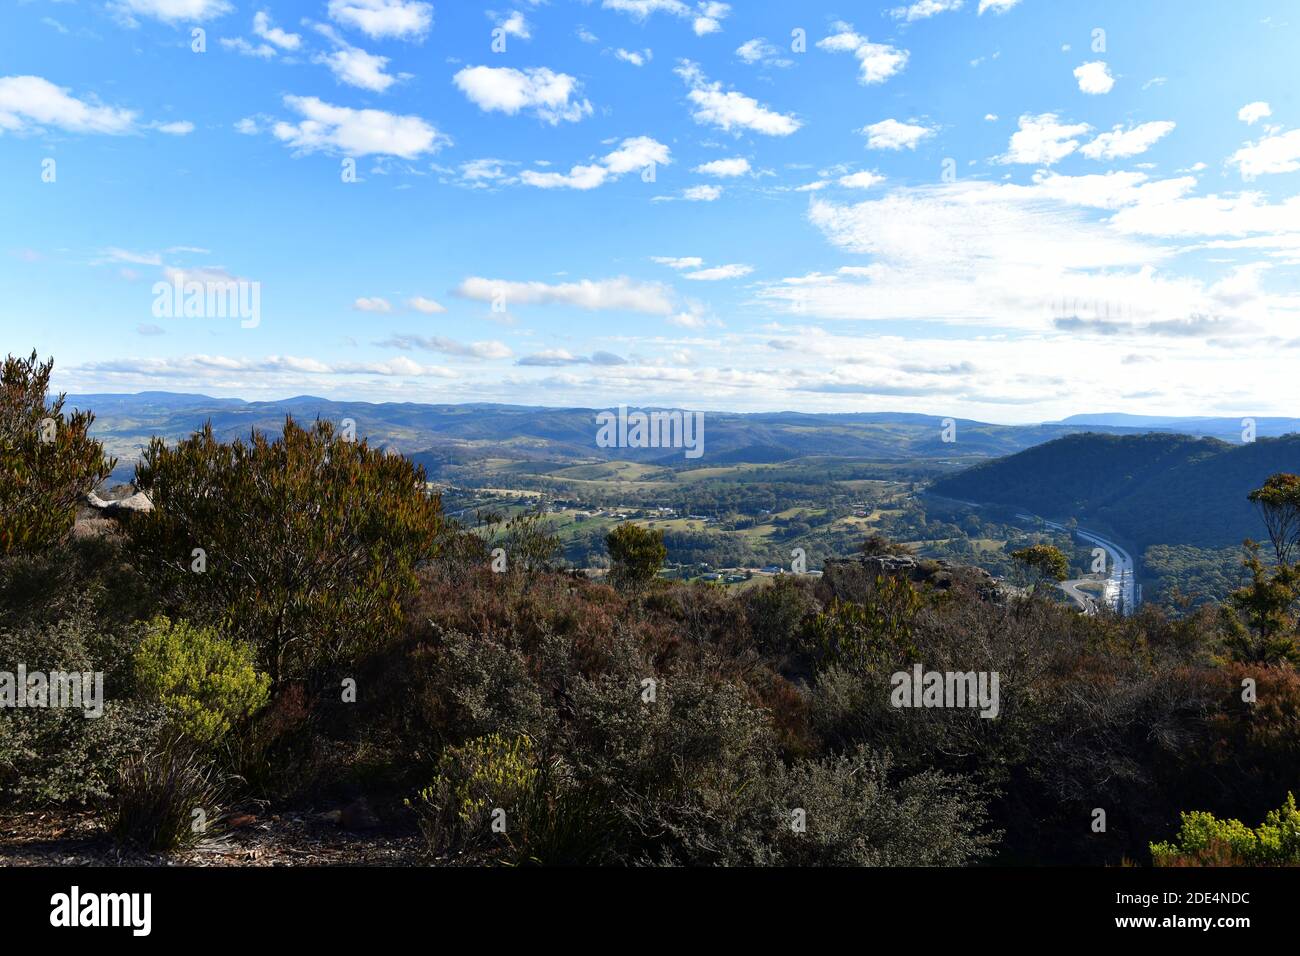 A view of the countryside near Lithgow, Australia Stock Photo